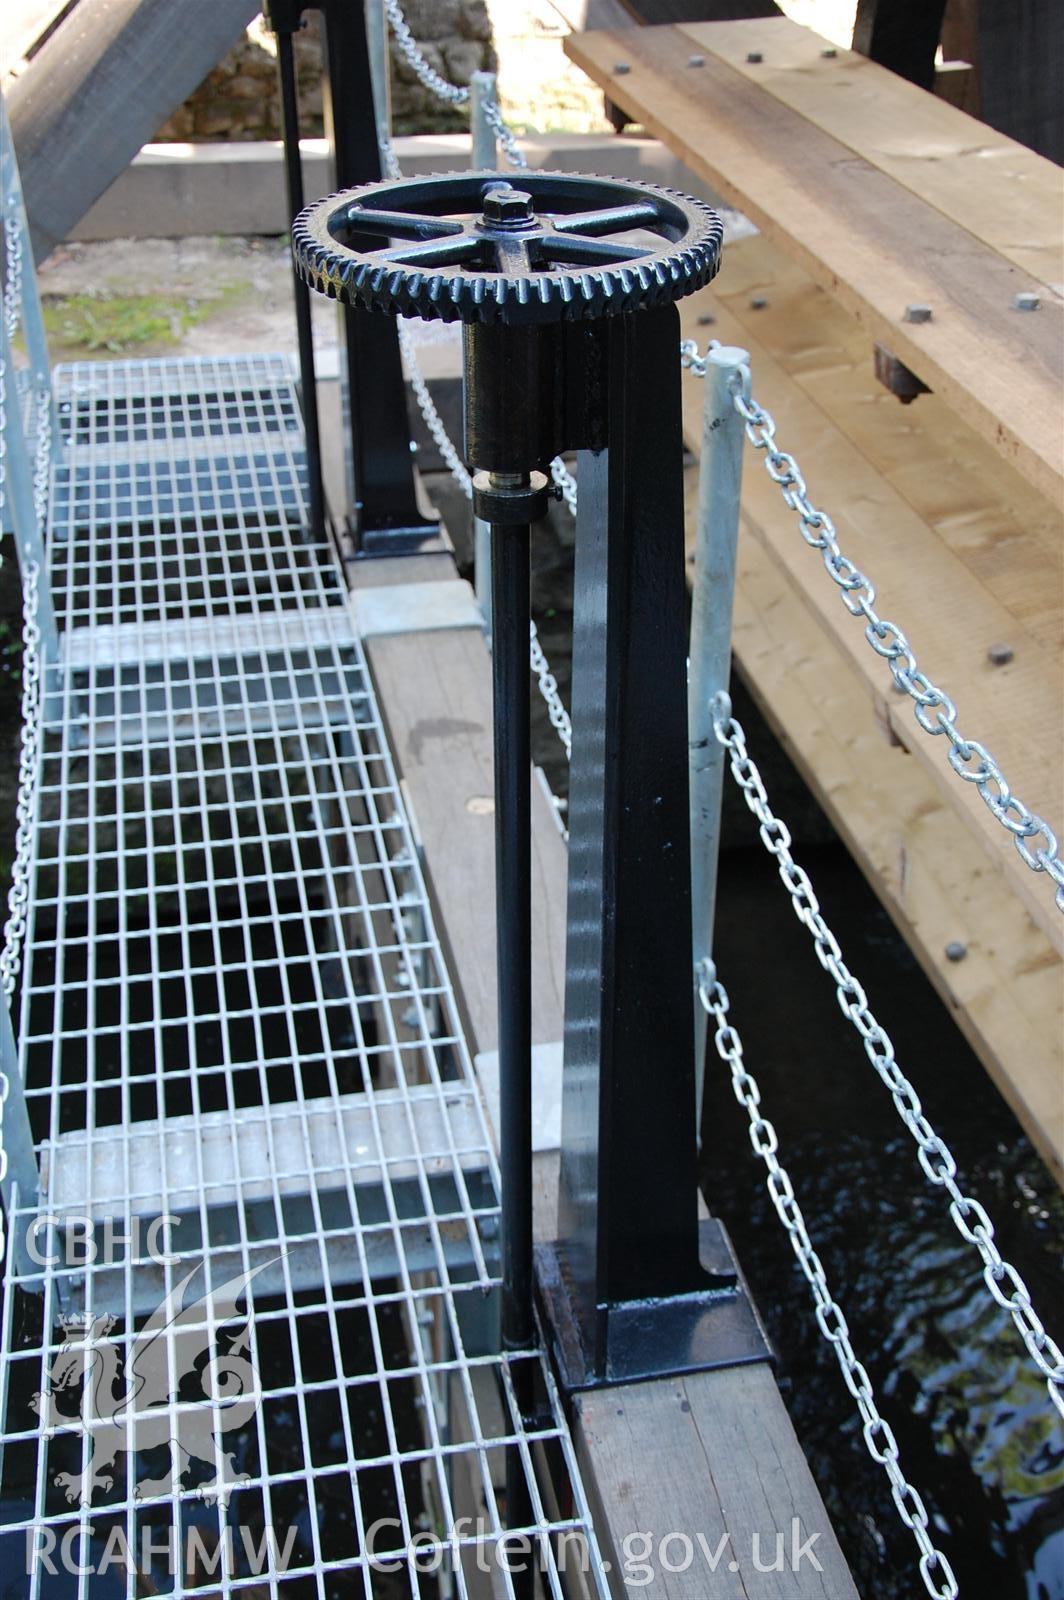 Digital image relating to Melingriffith Water Pump: Detail of lifting mechanism and pedestal.